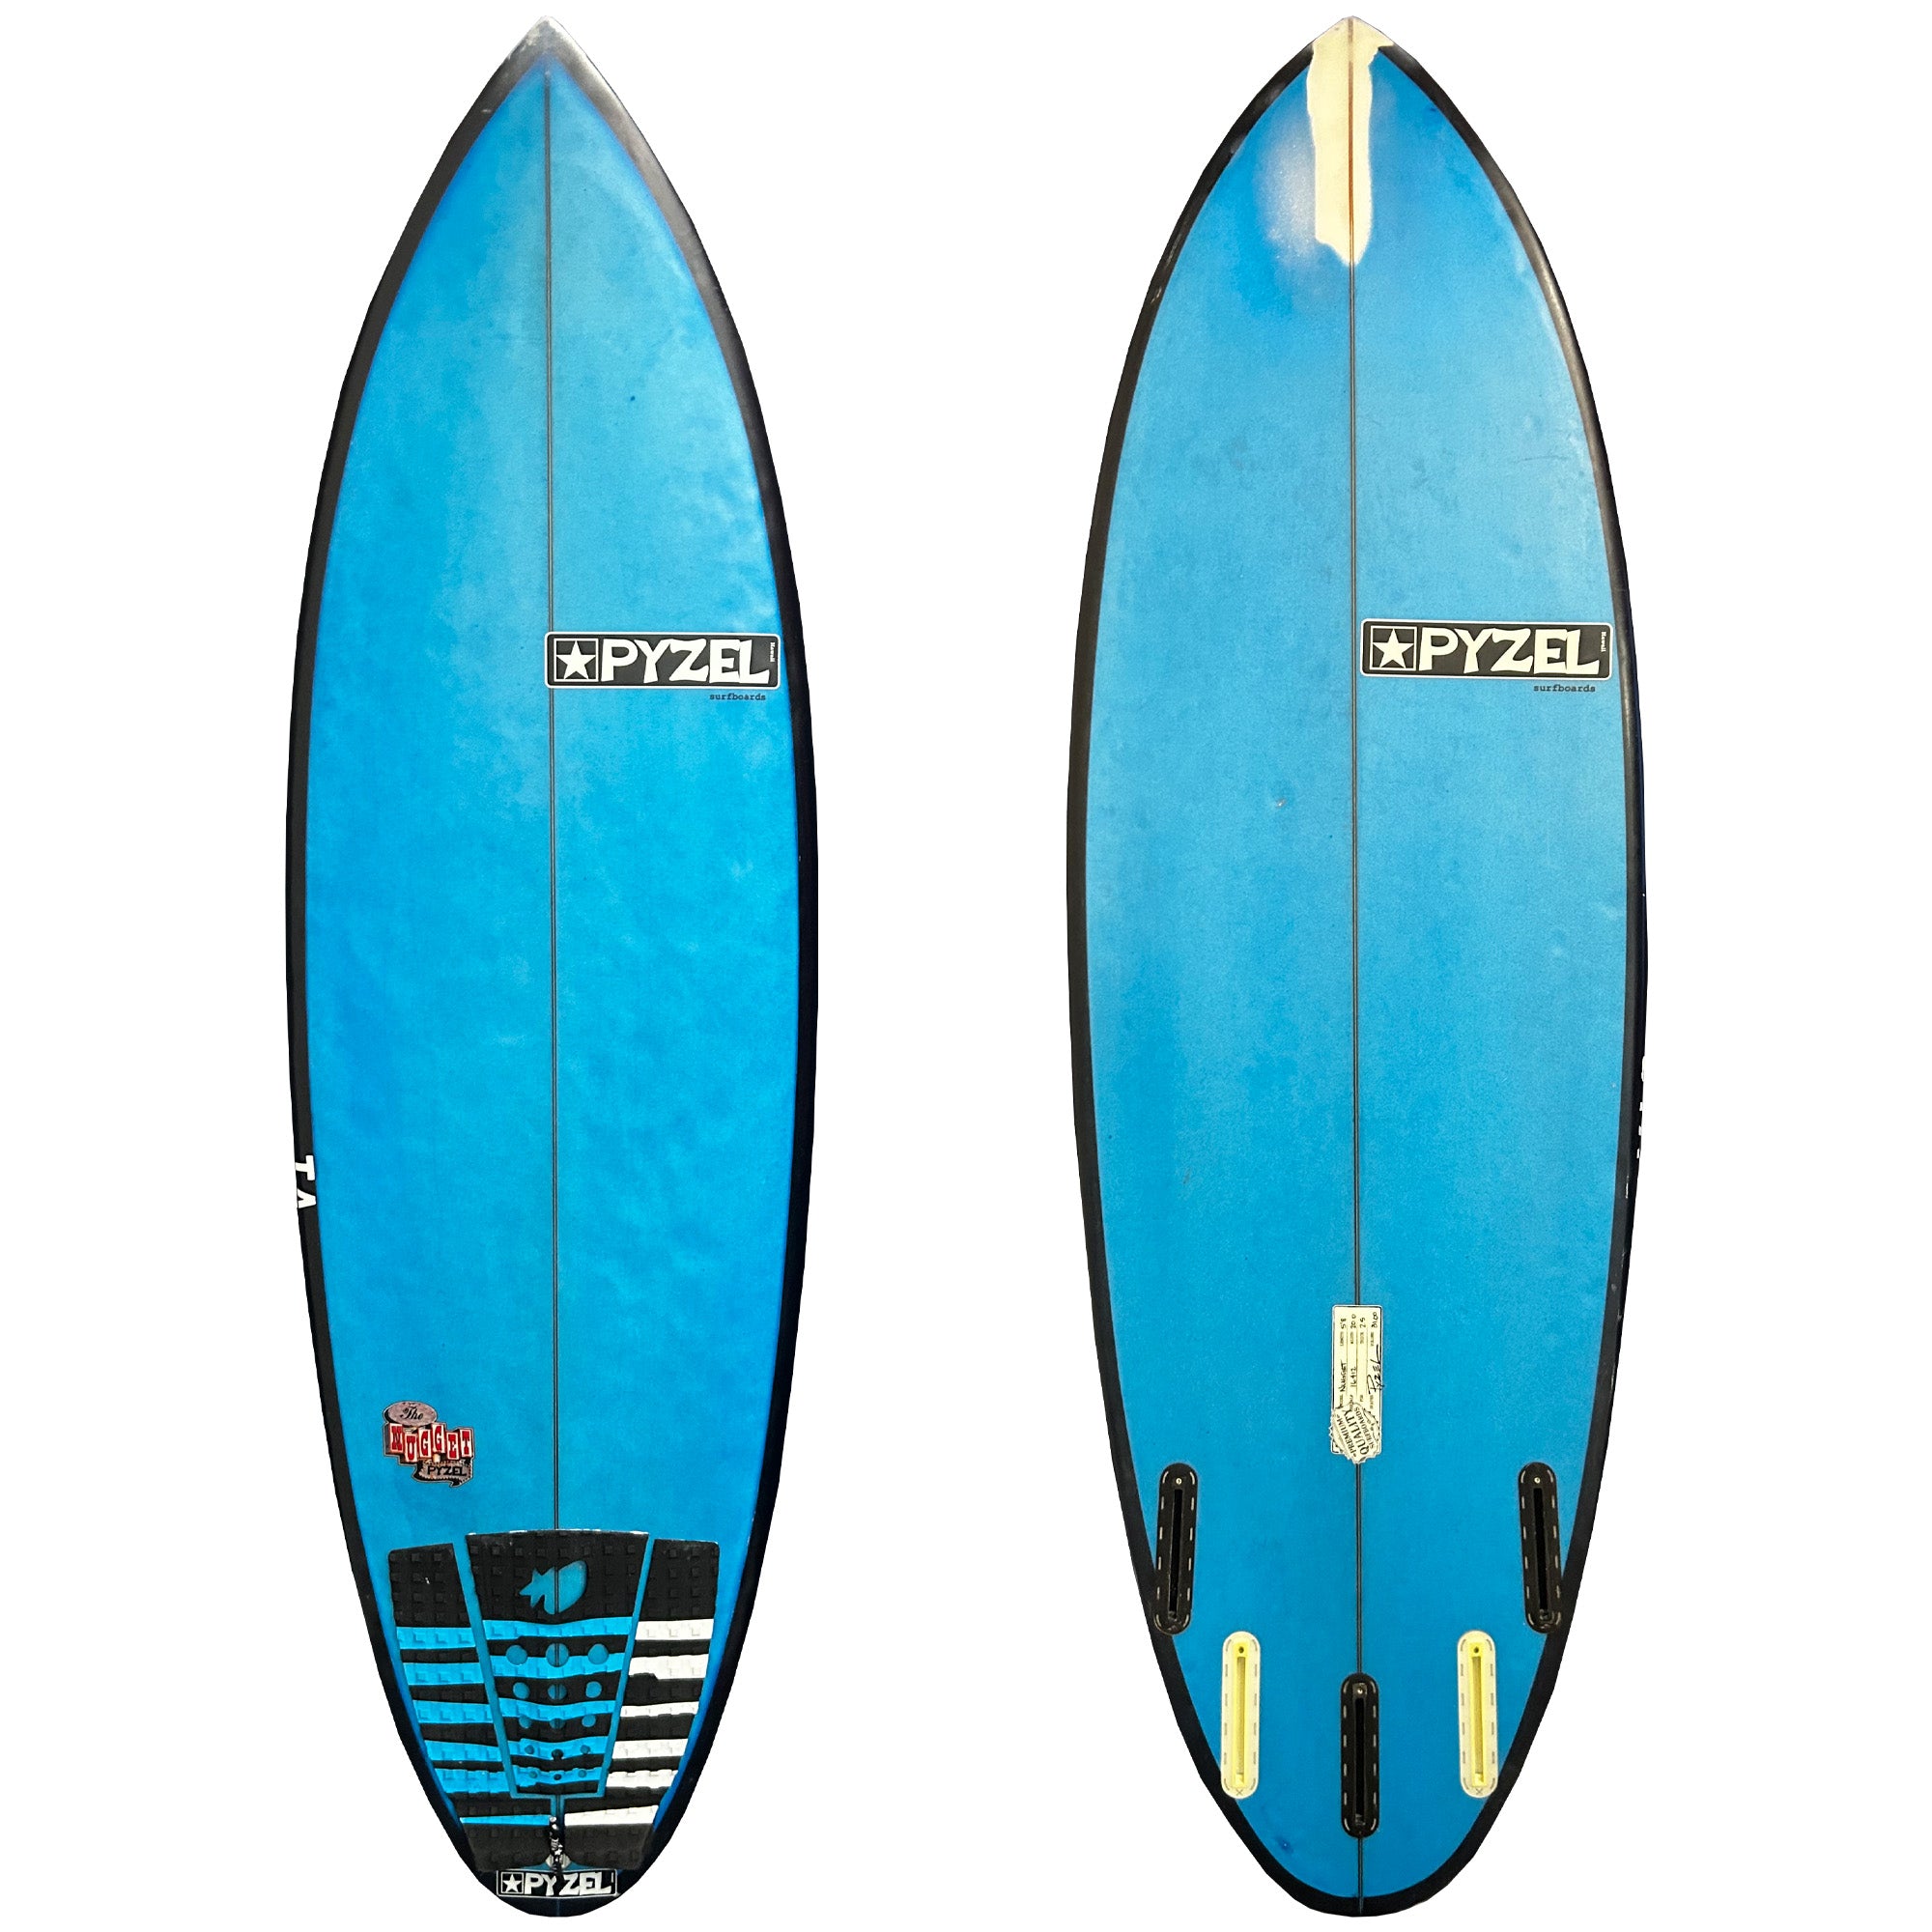 Pyzel Nugget 5'8 Consignment Surfboard